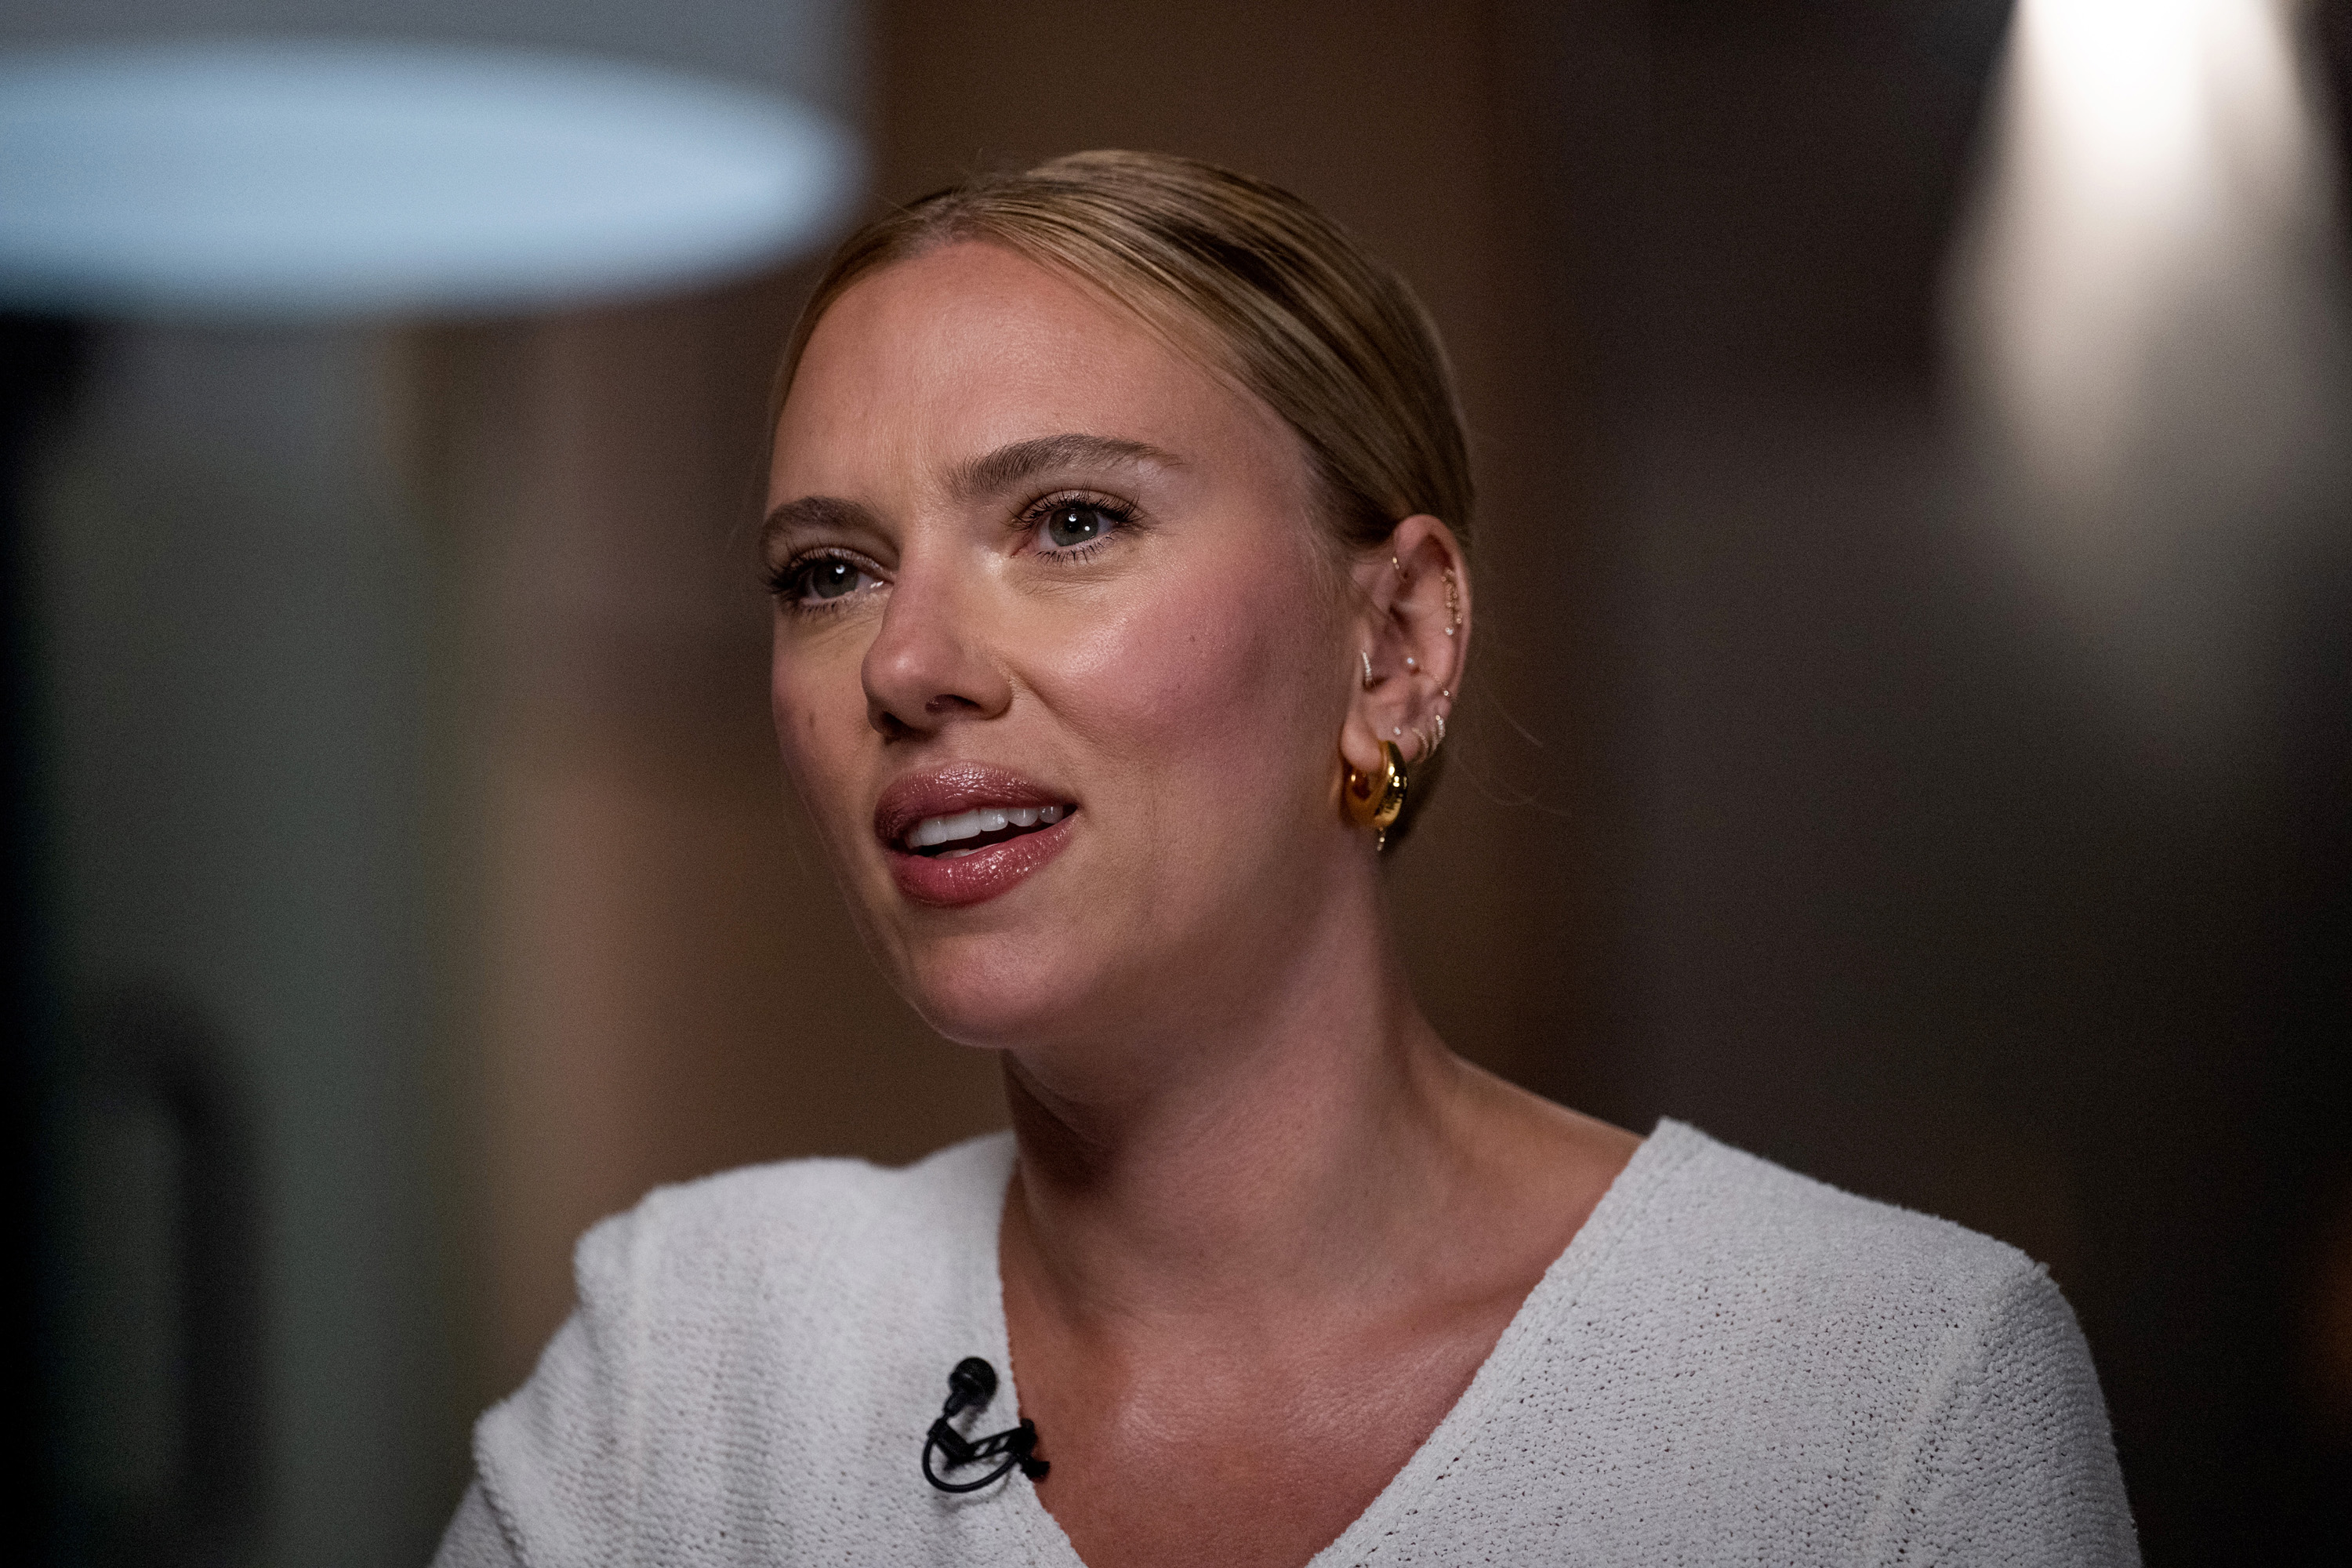 Scarlett Johansson in "TODAY with Willie Geist" on June 18, 2023. | Source: Getty Images